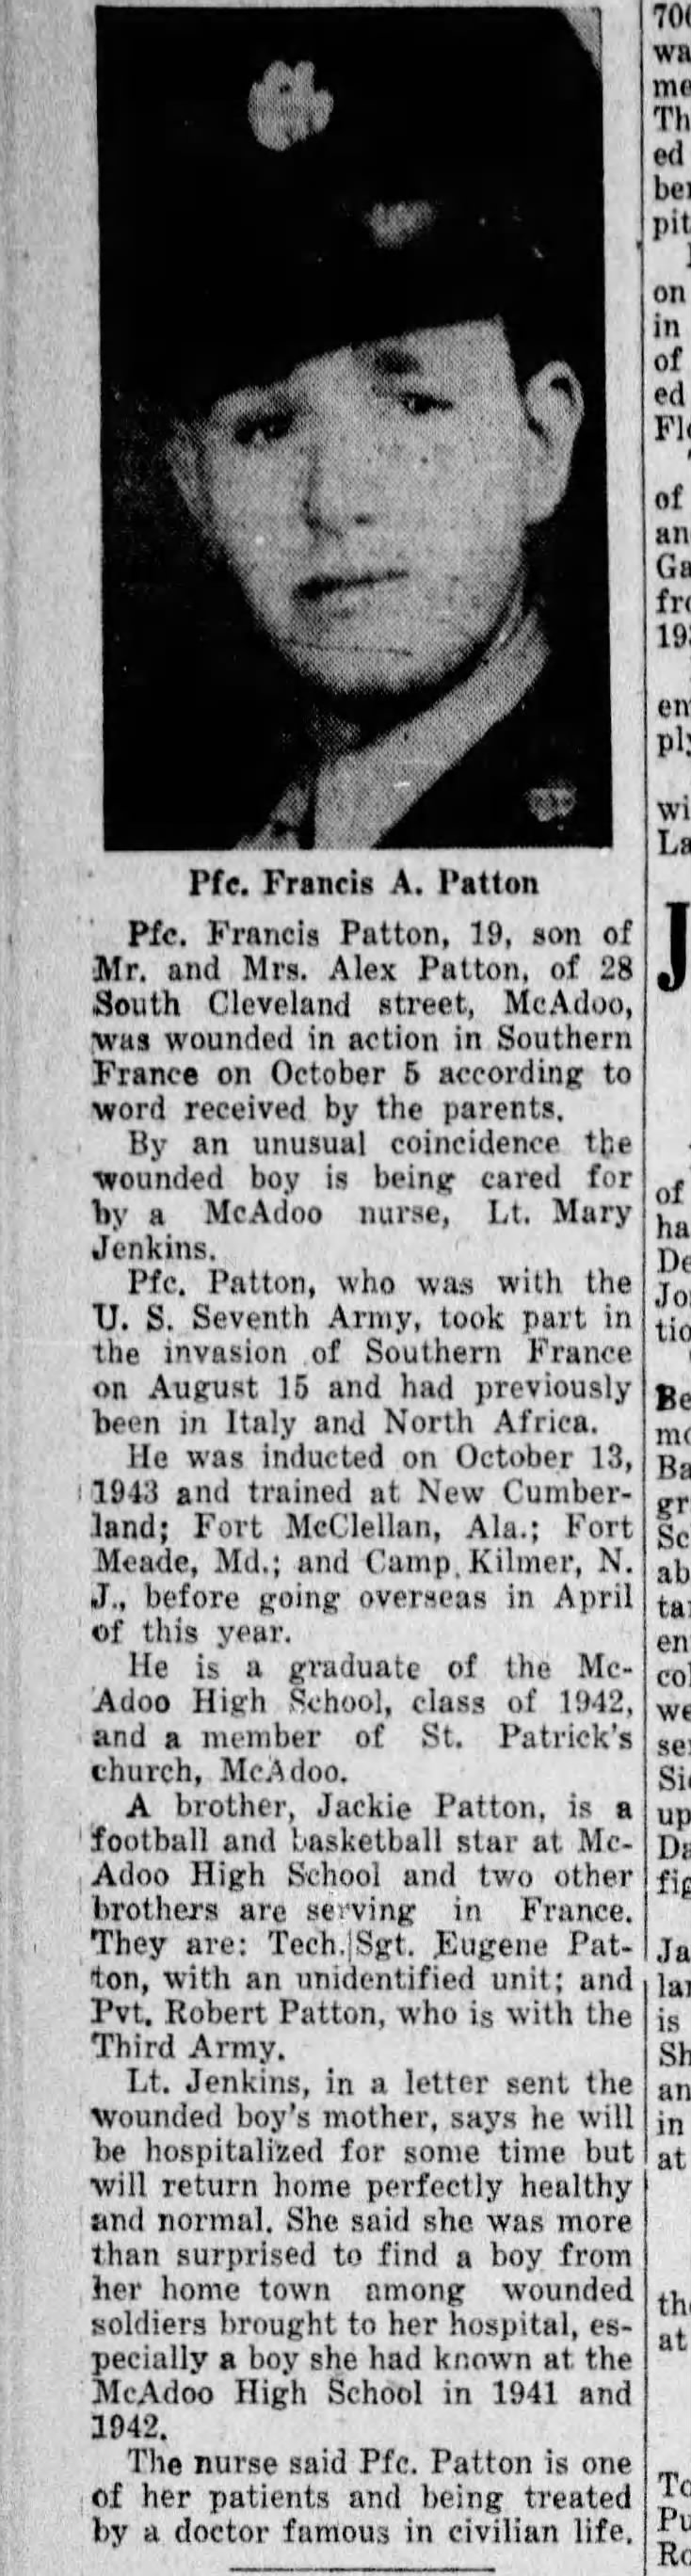 Francis A. Patton Wounded